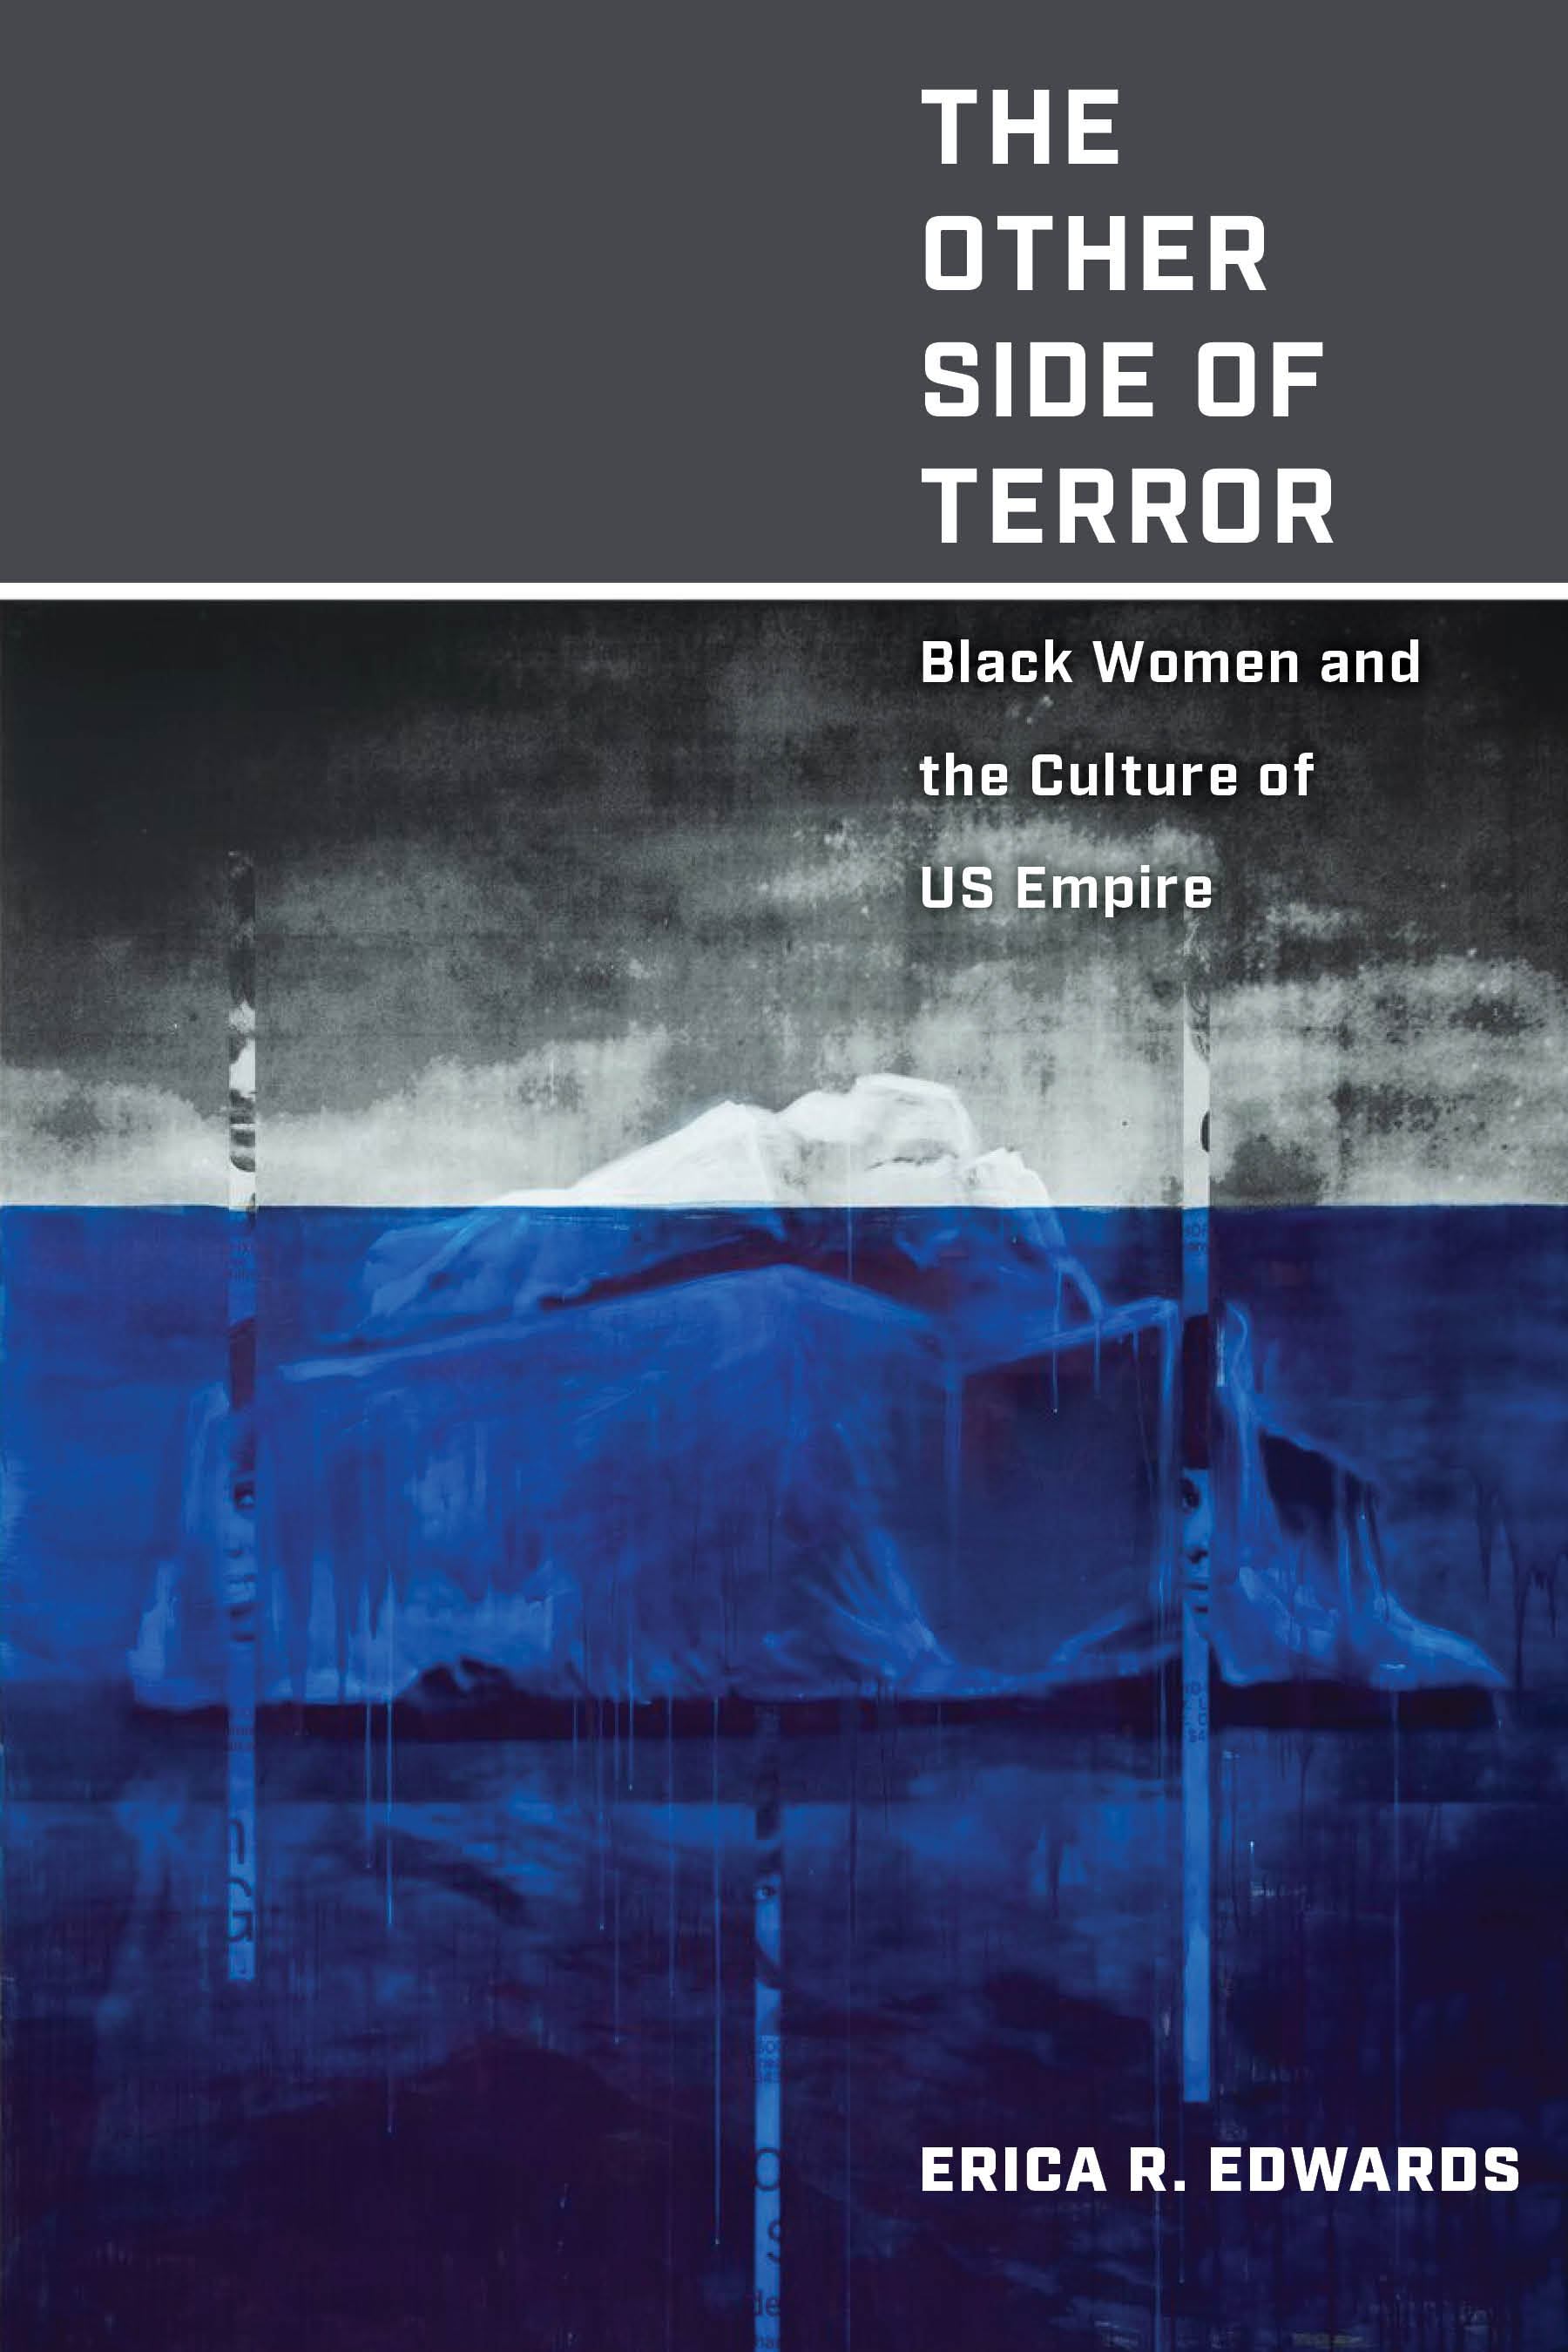 Erica R. Edwards: The Other Side of Terror (2021, New York University Press)